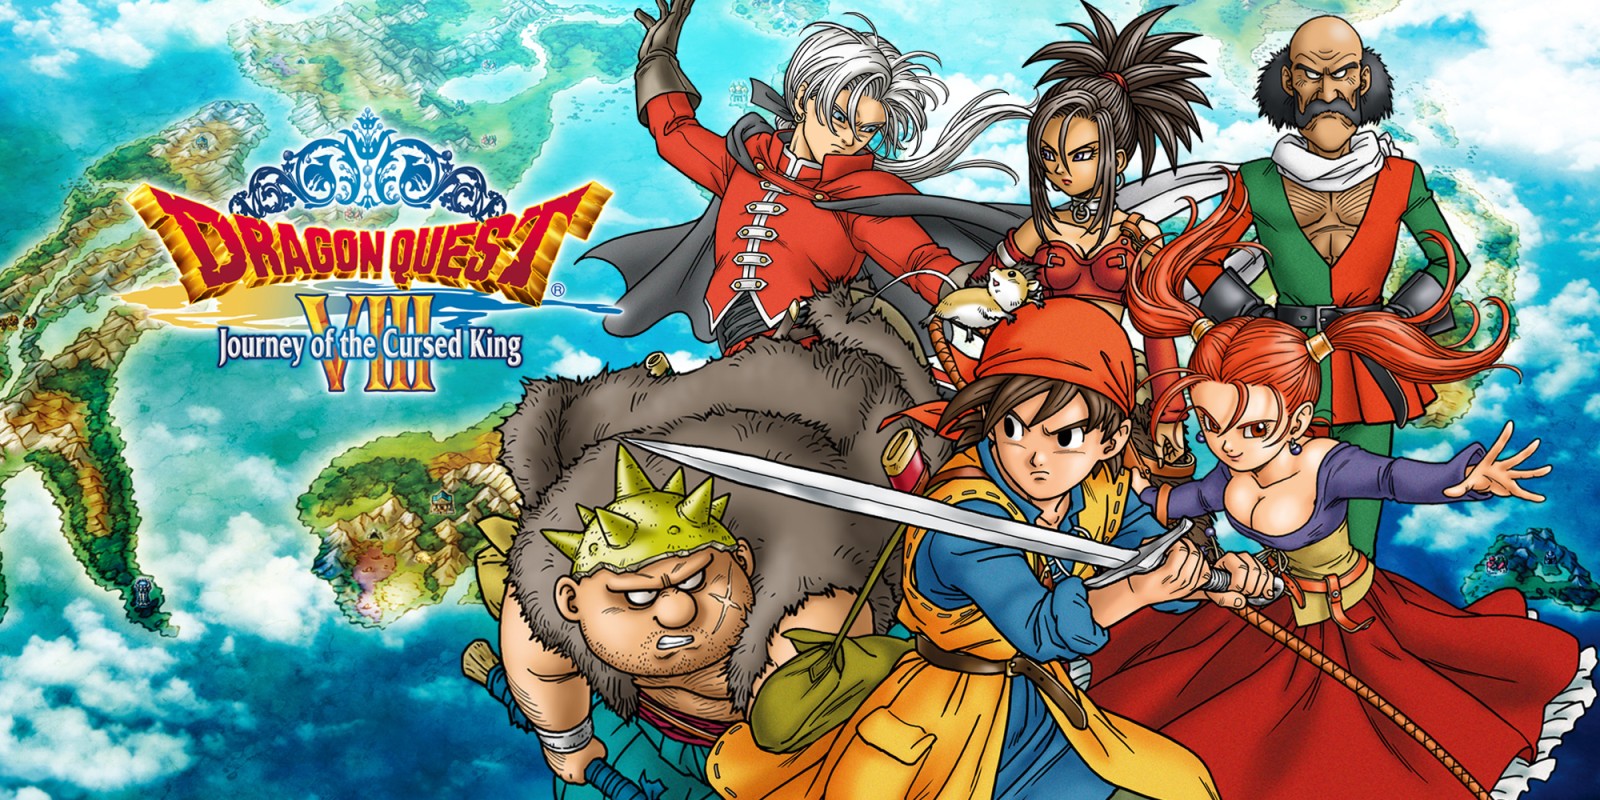 Dragon Quest VIII: Journey of the Cursed King - Press Kit